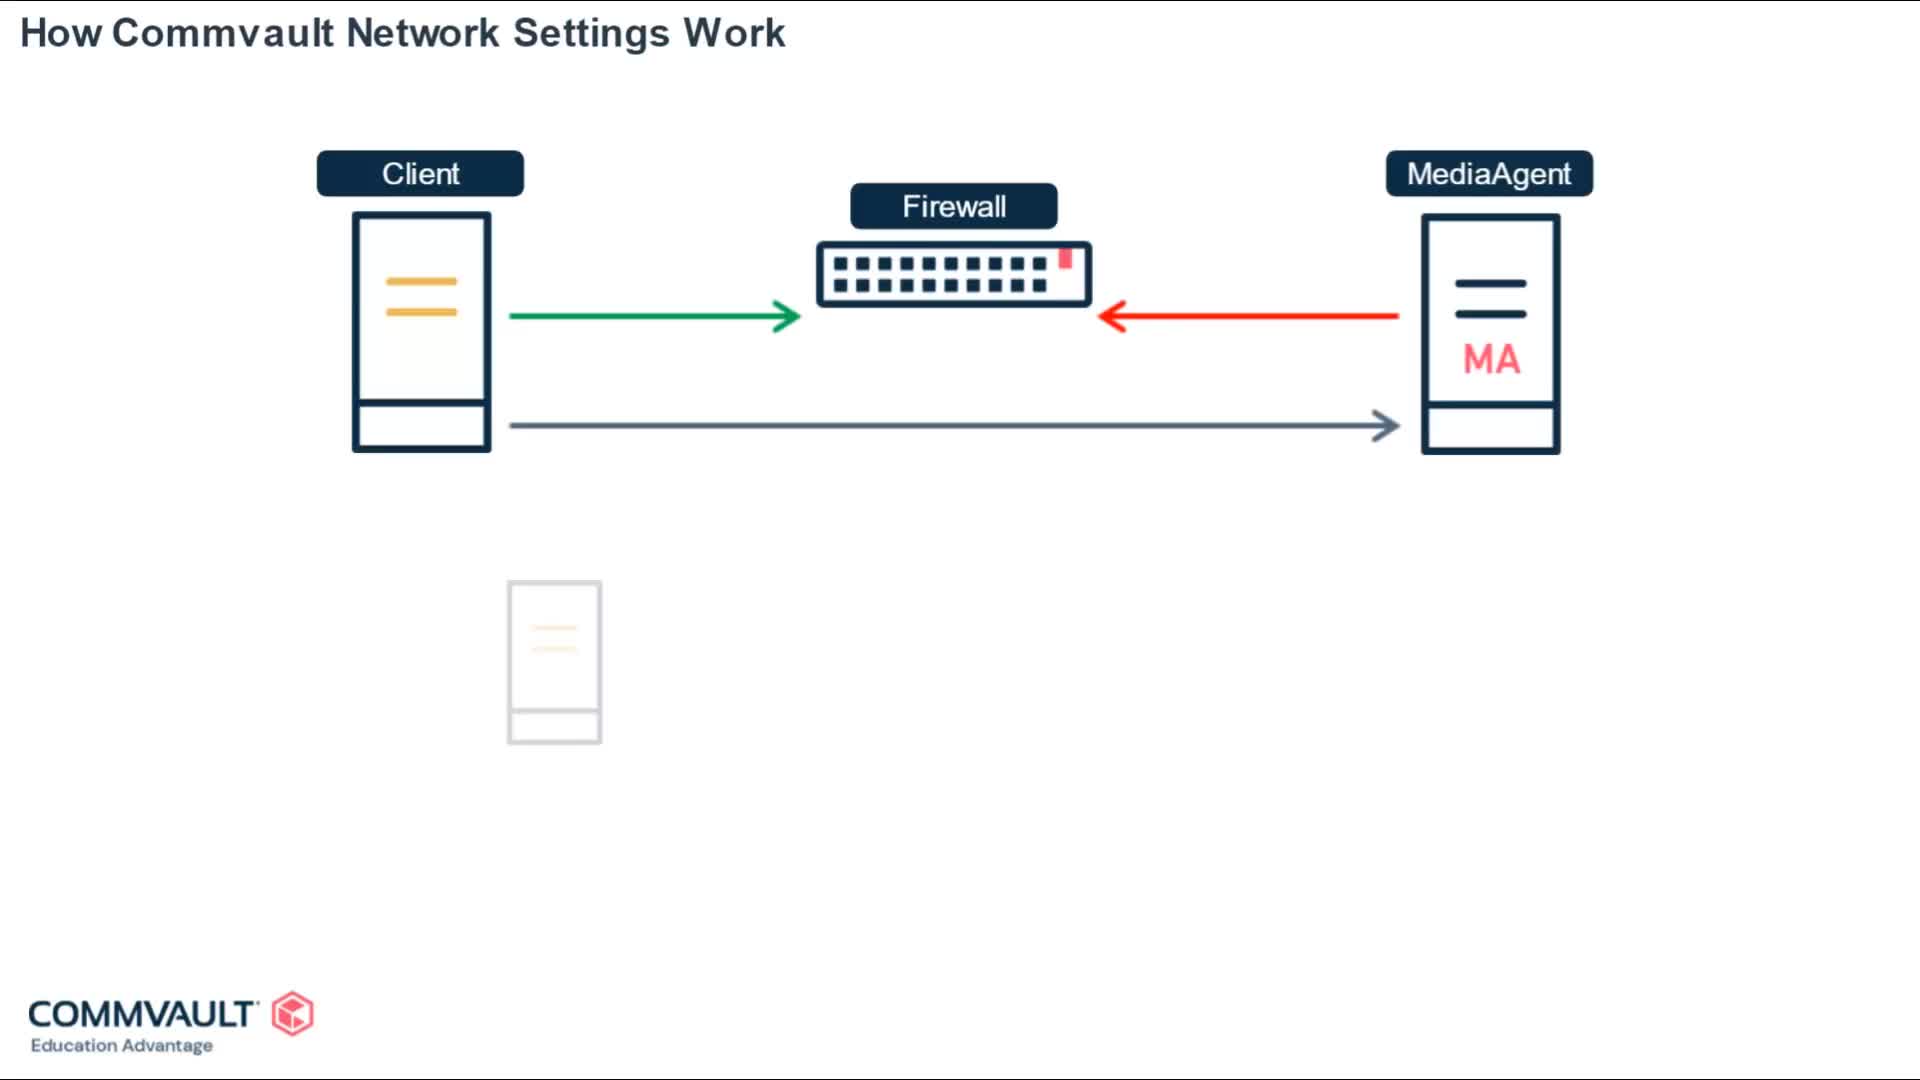 3.3.1.Network Configuration Overview